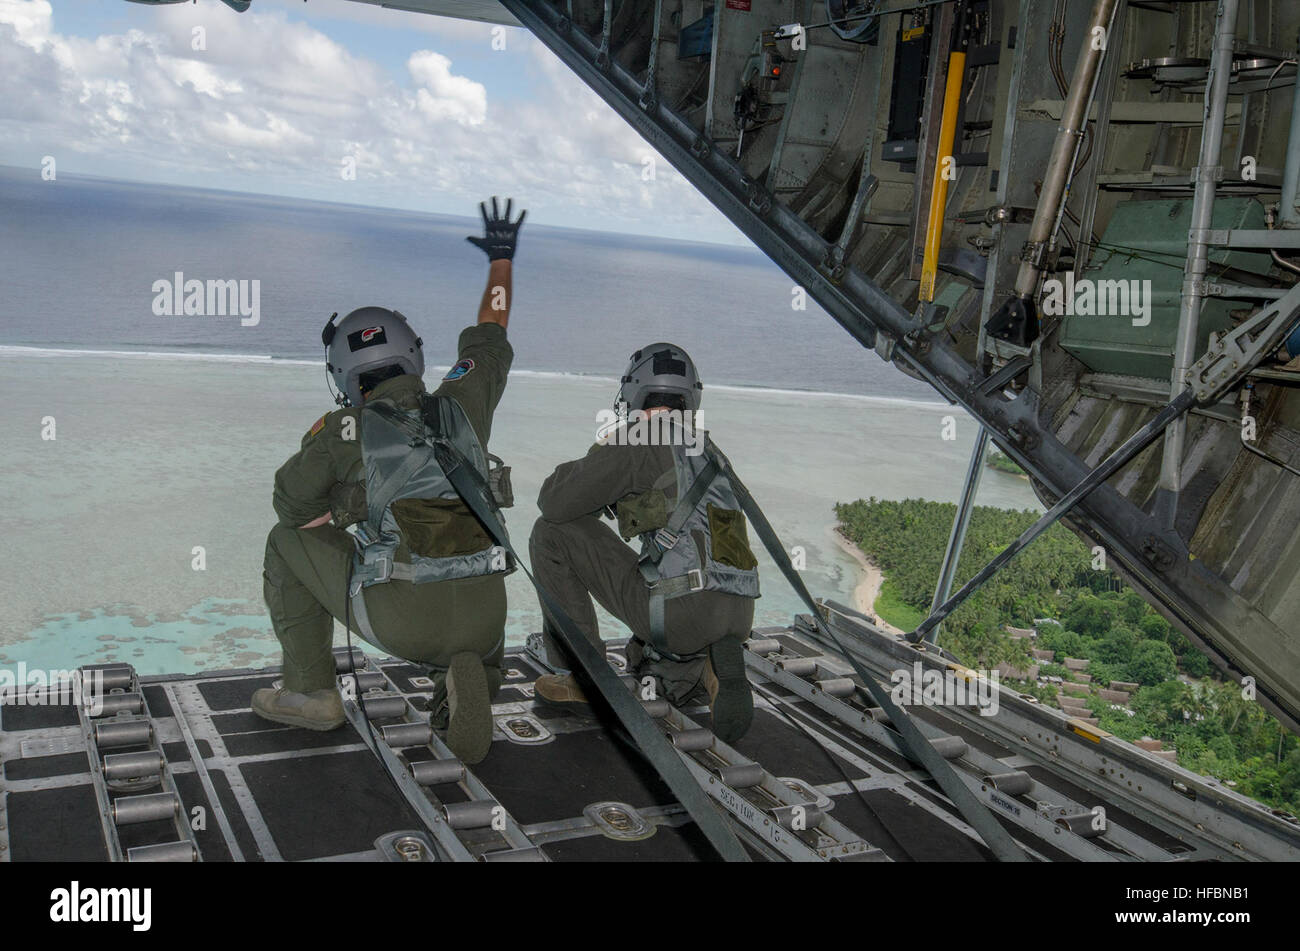 161211-N-YM720-078  FEDERATED STATES OF MICRONESIA (Dec. 12, 2016) – A loadmaster attached to the 36th Airlift Squadron, Yokota Air Base, Japan, waves to the natives of a Micronesian island after dropping off care packages during Operation Christmas Drop, Dec. 11.  Operation Christmas Drop is an international humanitarian operation that provides critical supplies to 56 islands through the Commonwealth of the Northern Marianas, Federated States of Micronesia and Republic of Palau, impacting about 20,000 people. (U.S. Navy photo by Petty Officer 2nd Class Allen Michael McNair/Released) 161211-N- Stock Photo